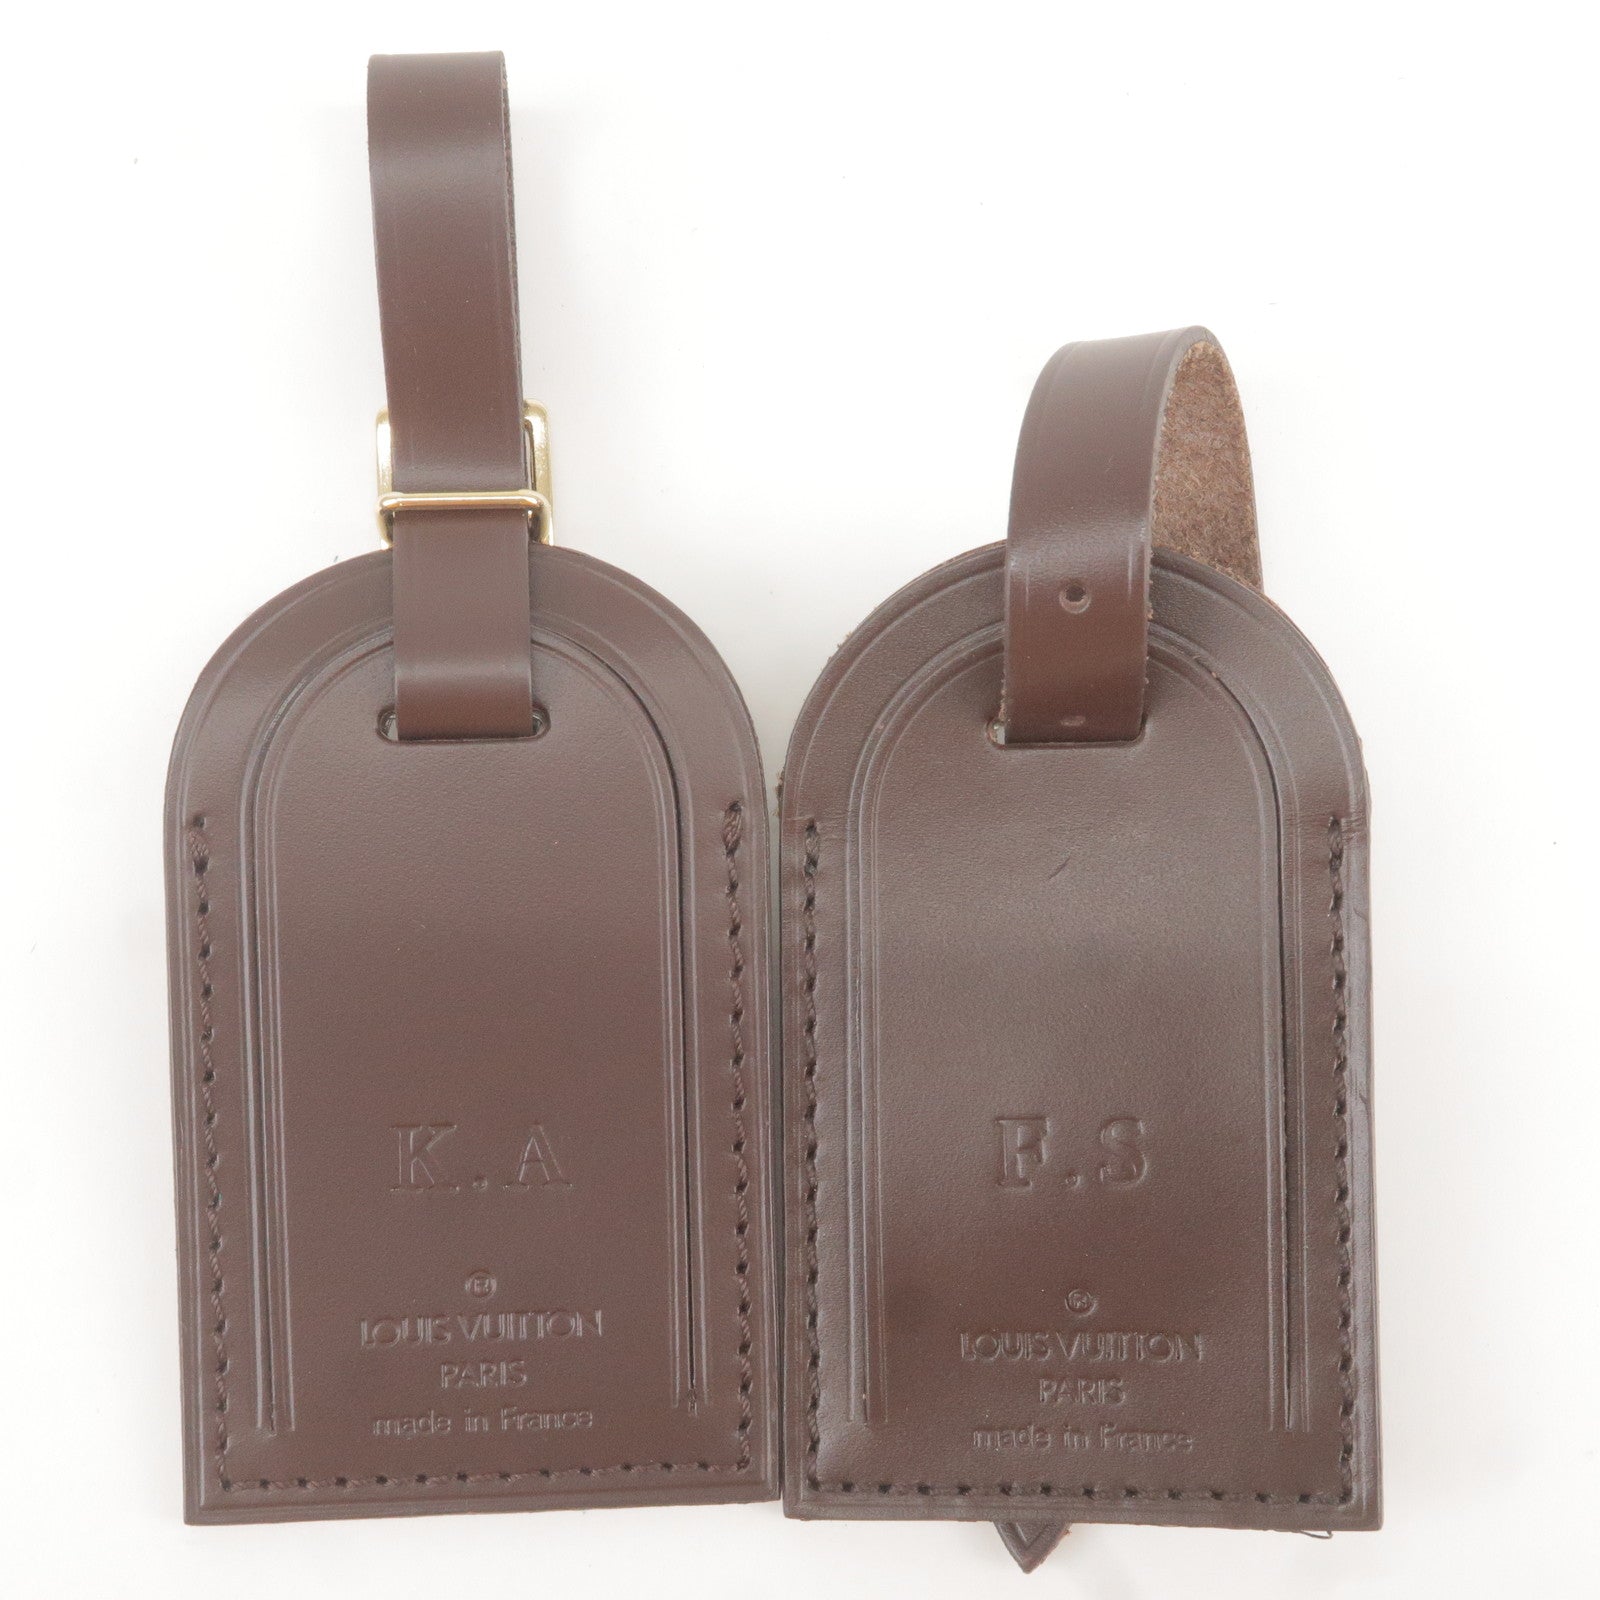 Louis-Vuitton-Set-of-20-Name-Tag--Leather-Beige-Brown-Yellow